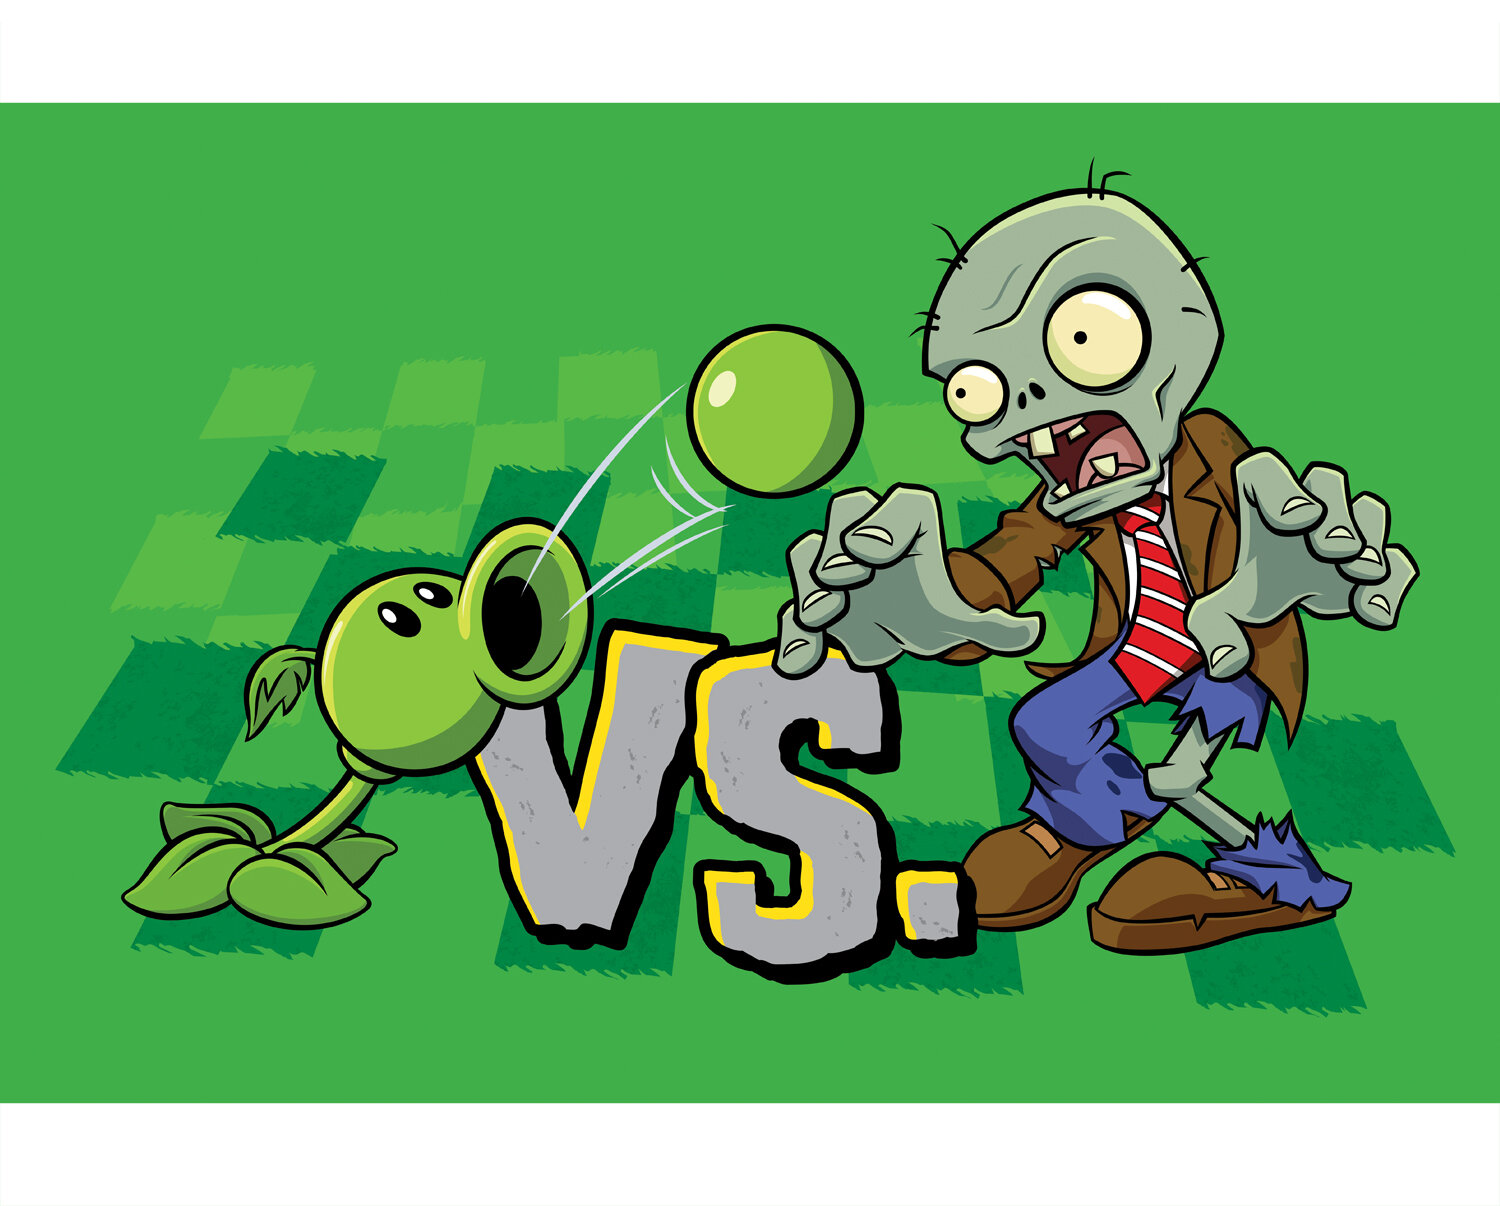 Plants vs. Zombies Style Guide - Design Force